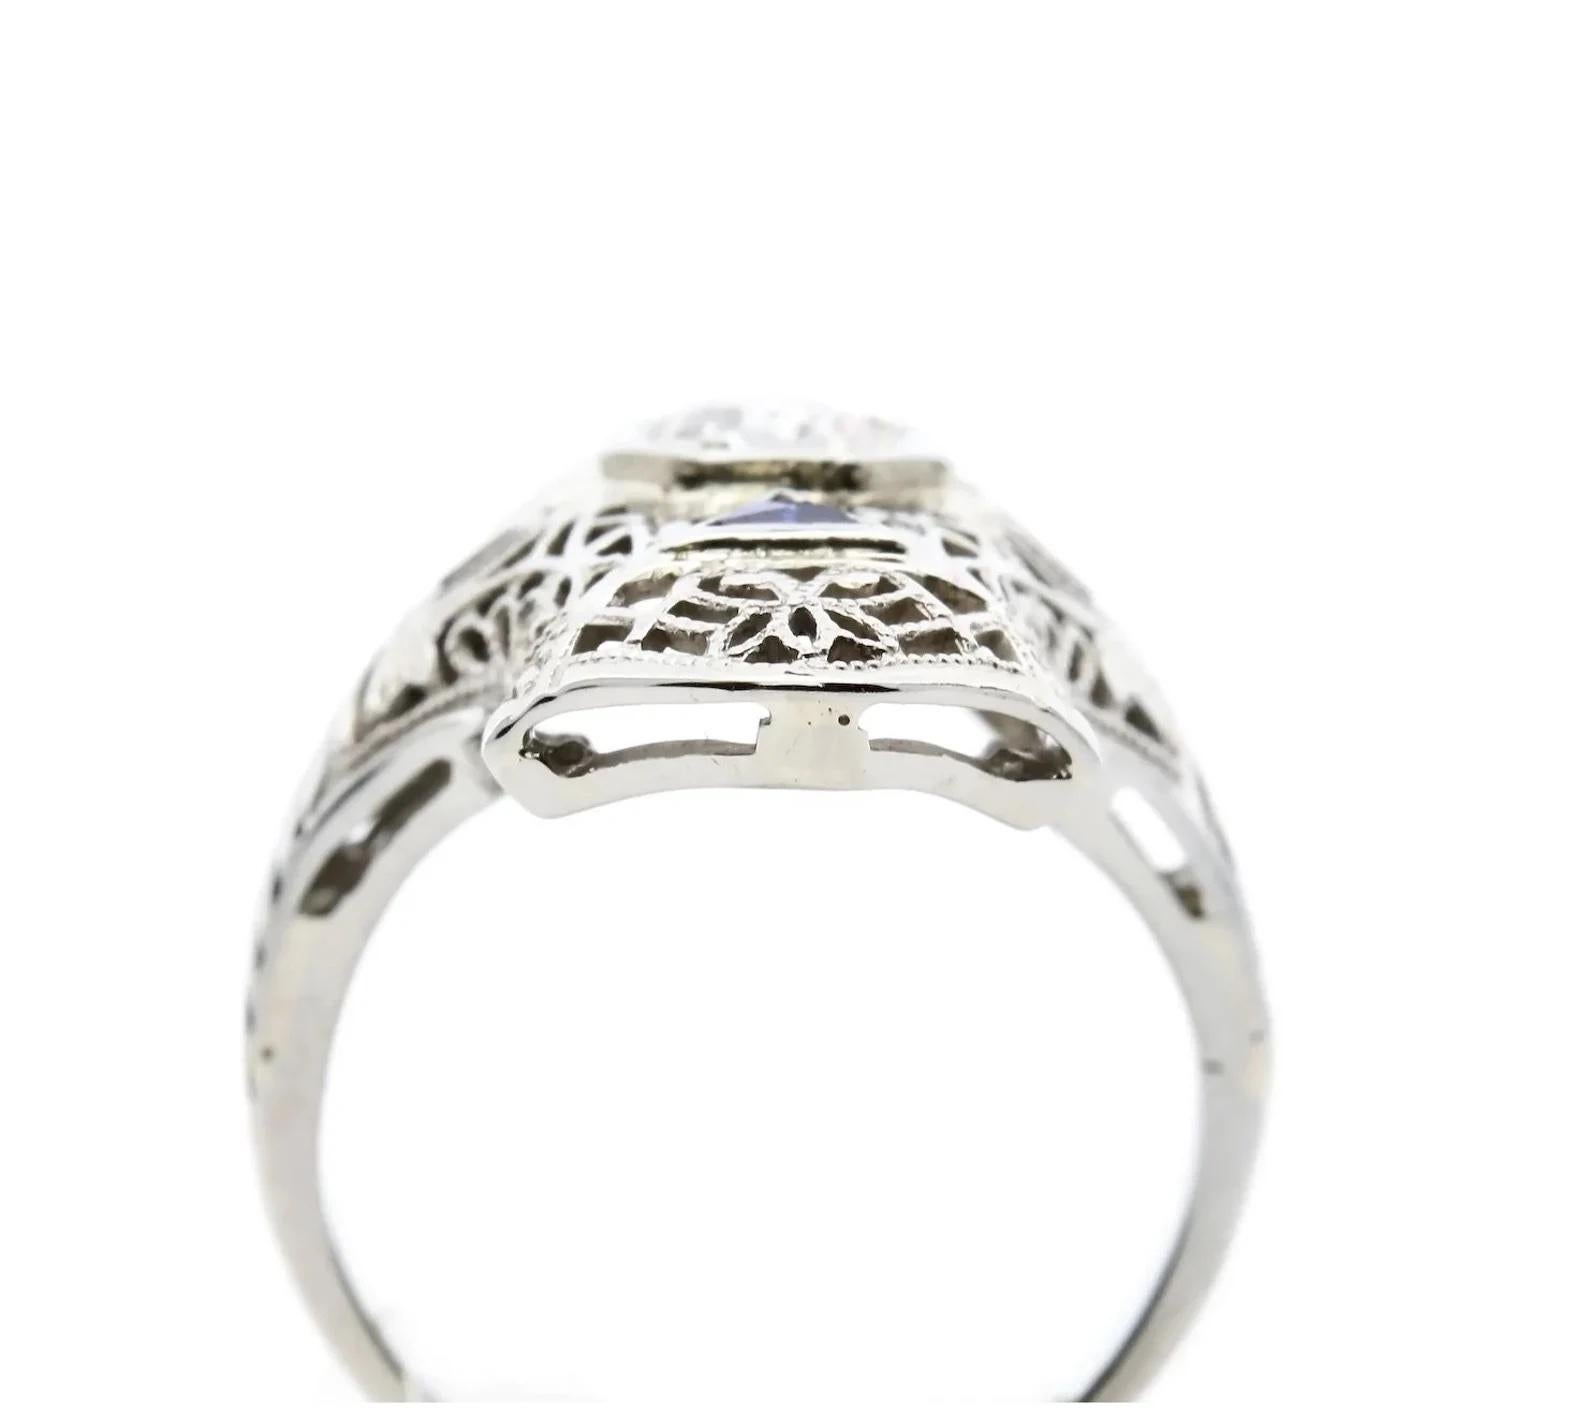 Art Deco Diamond & French Cut Sapphire Trilogy Cocktail Ring in 18K White Gold In Good Condition For Sale In Boston, MA